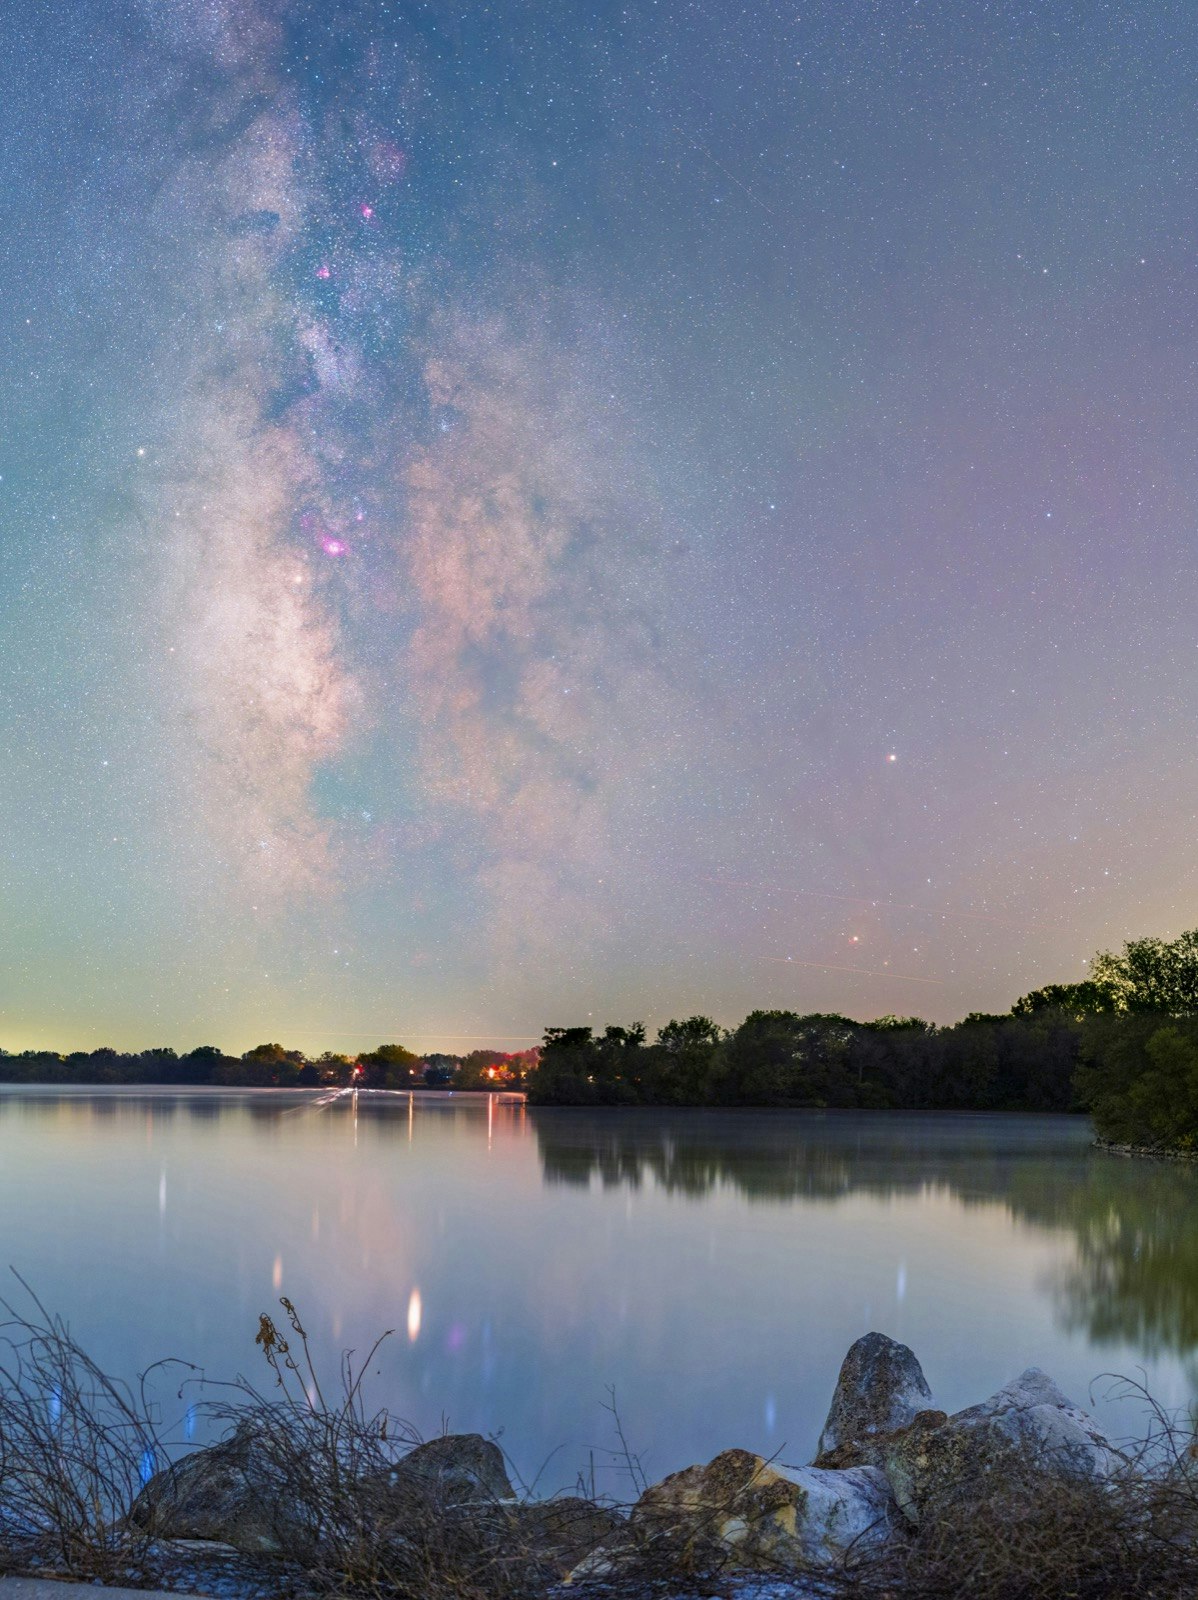 A view of the milky way photographed to appear pastel over a lake in Nebraska